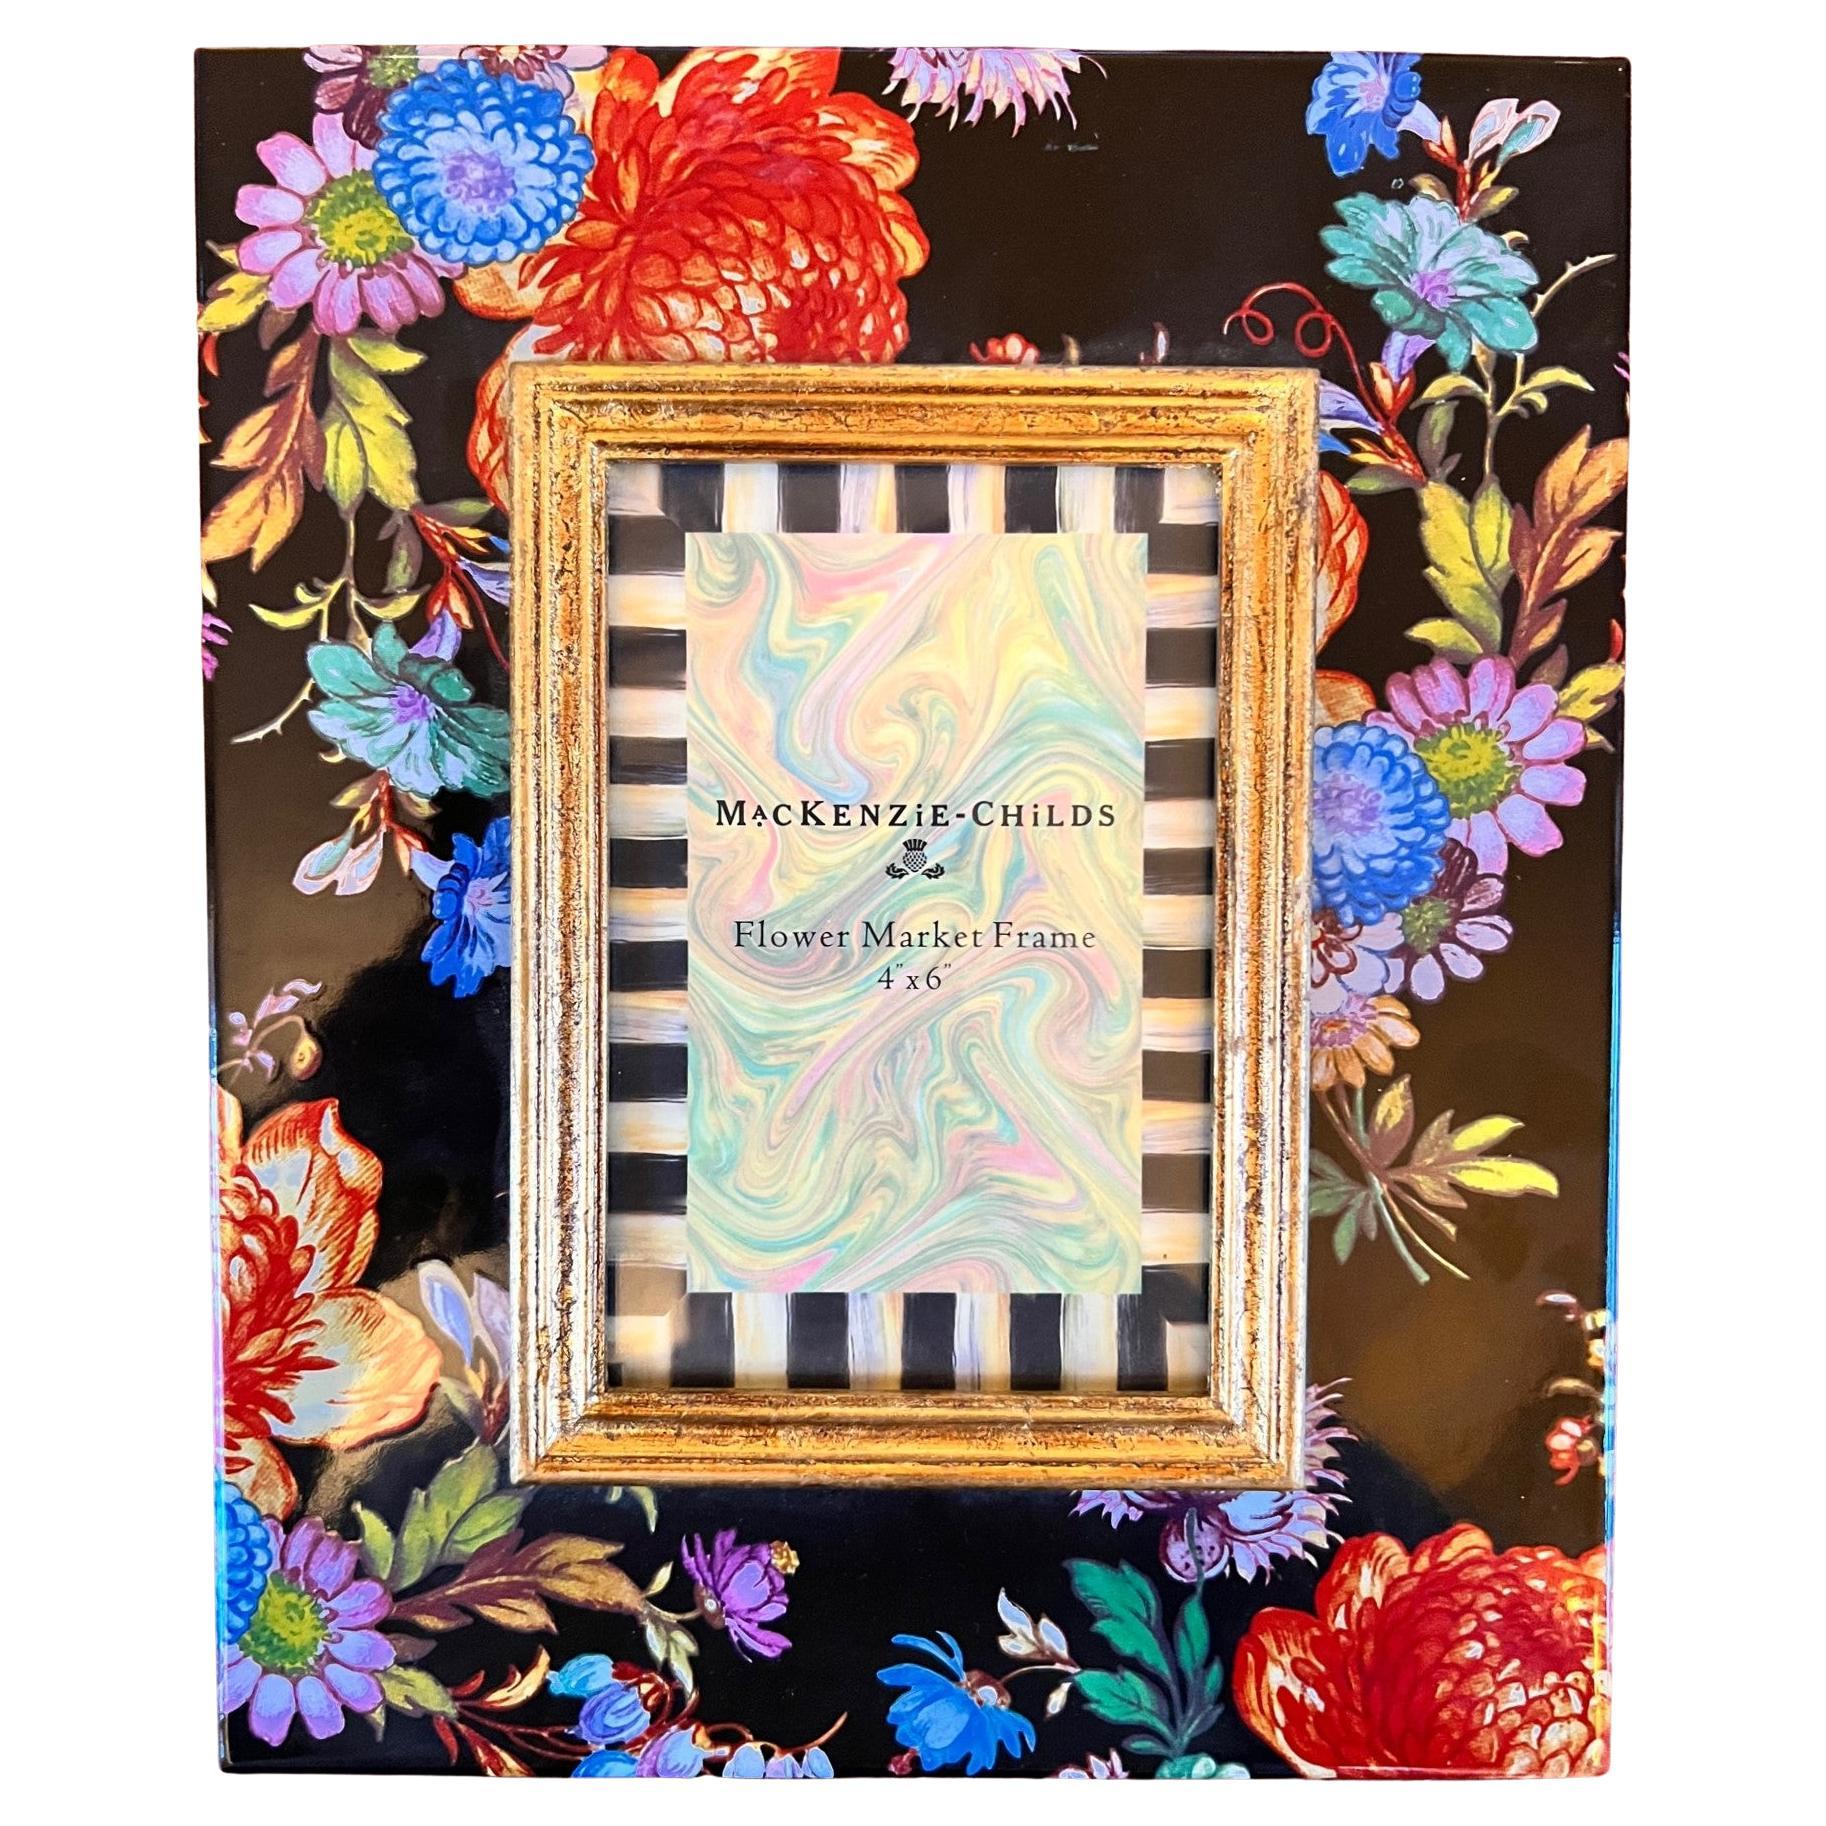 Mackenzie-Childs Flower Market Picture Frame in Discontinued Black Background For Sale